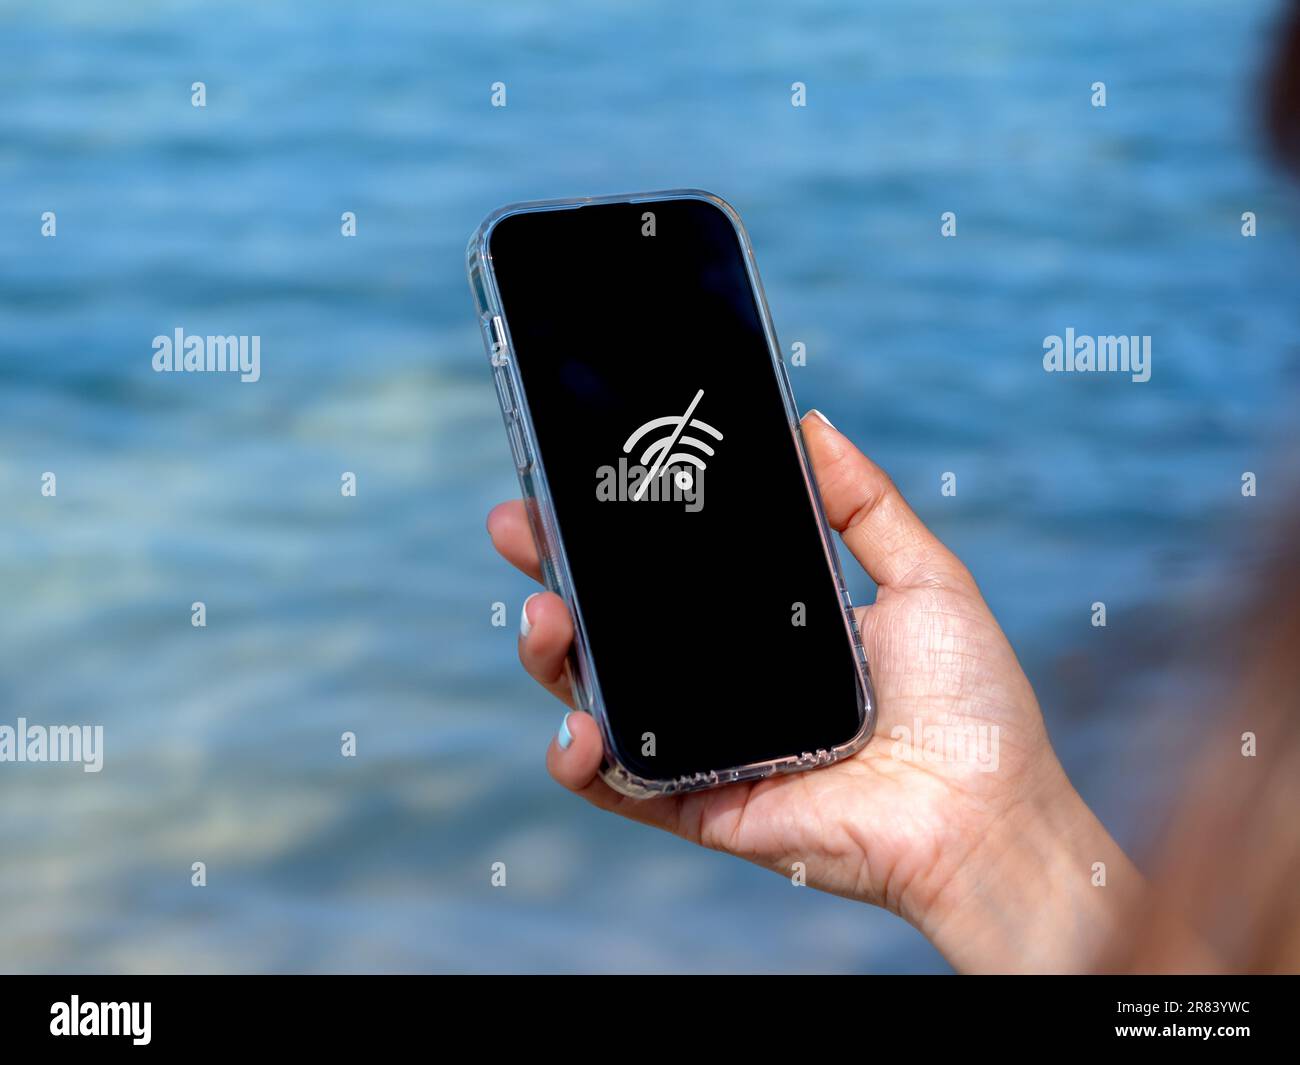 No internet connection technology concept. No signal service at the beach. Wi-Fi network offline sign on mobile smart phone display screen on woman's Stock Photo